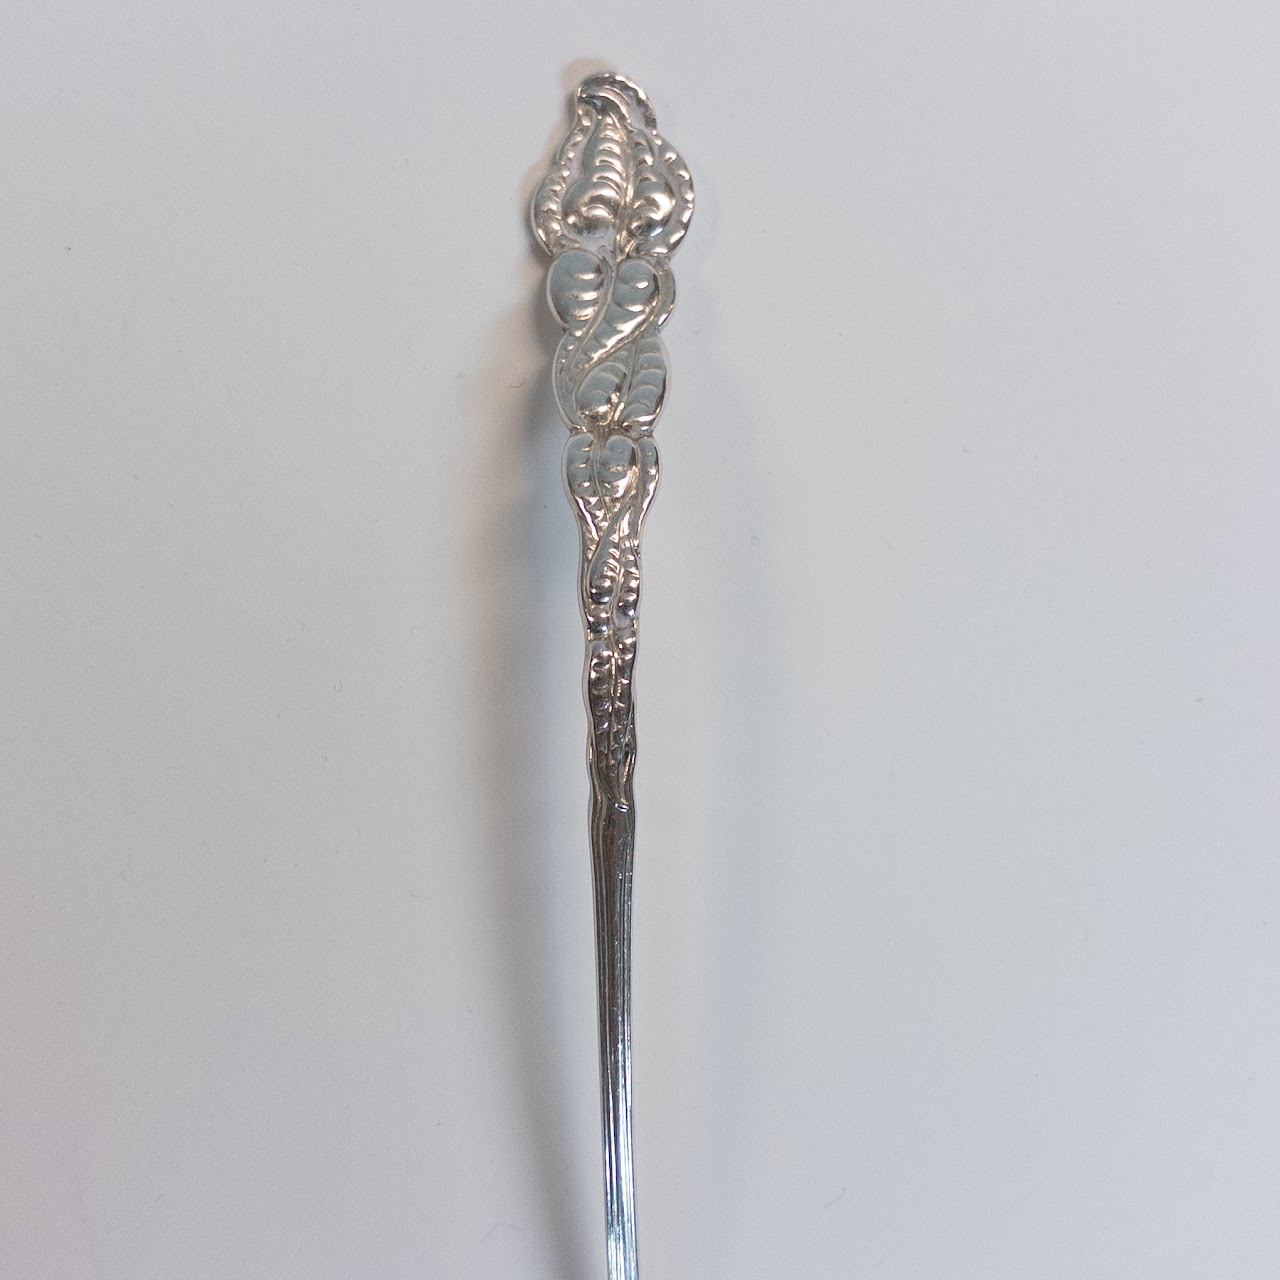 Tiffany & Co. Sterling Silver Ladle